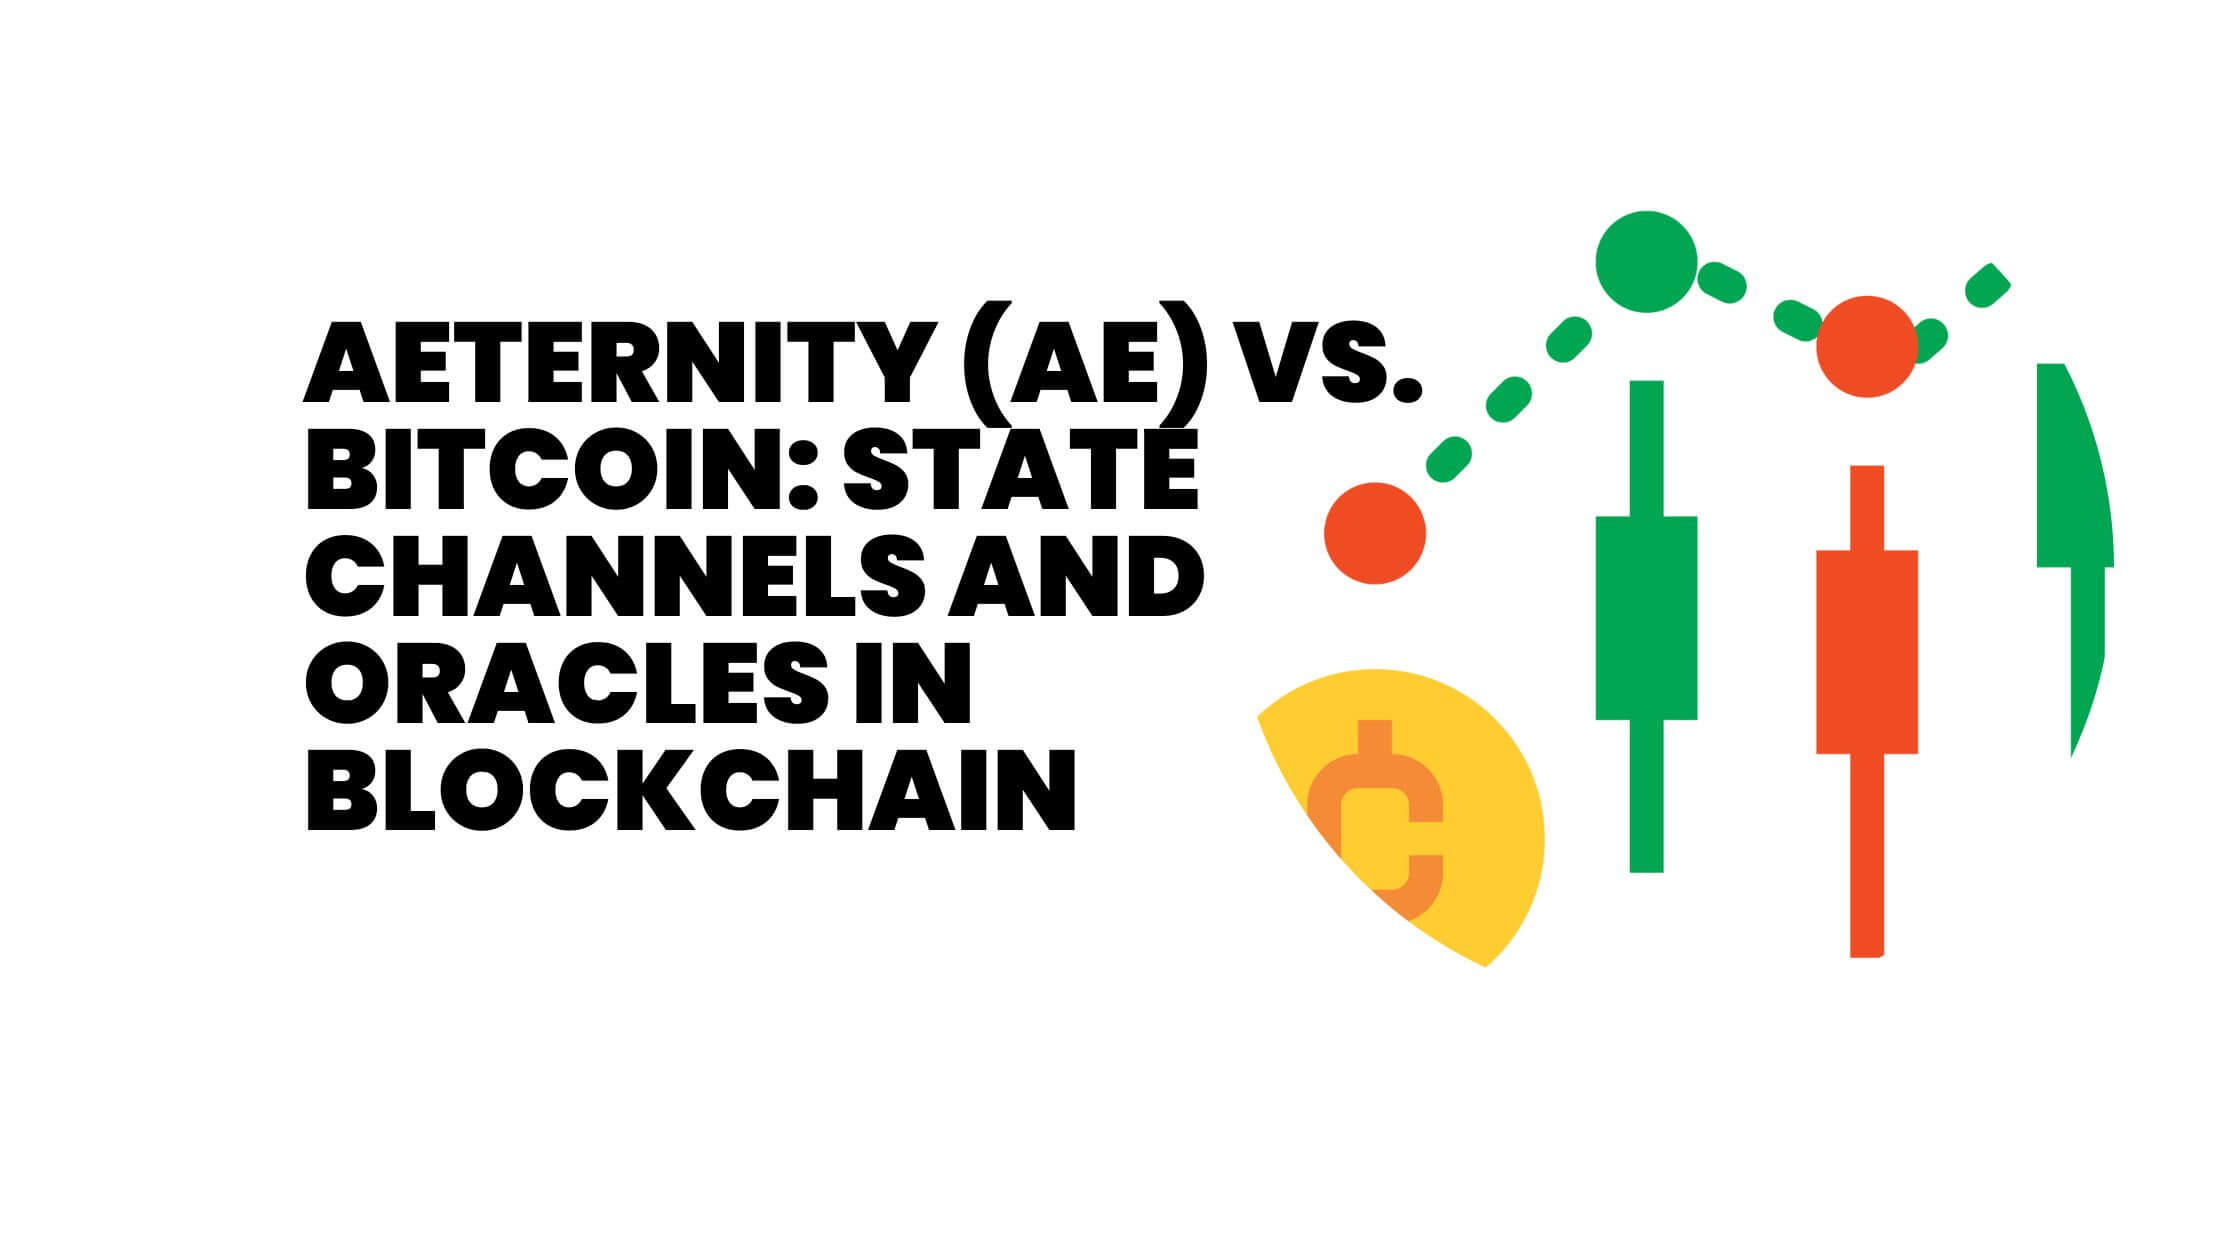 Aeternity (AE) vs. Bitcoin State Channels and Oracles in Blockchain